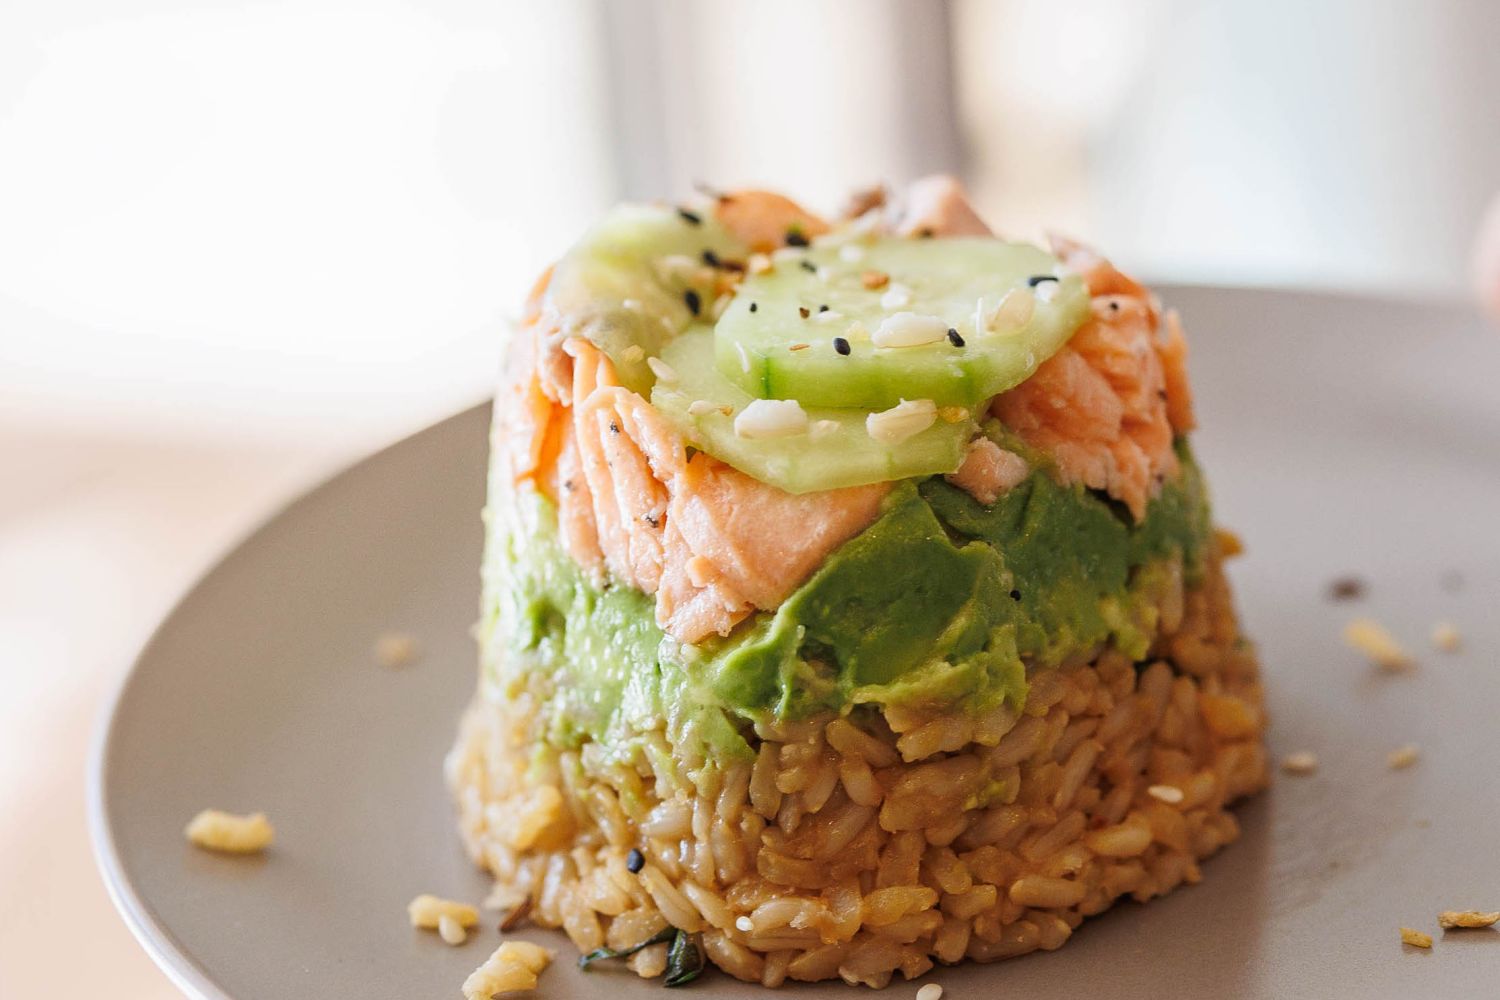 Salmon sushi stack with brown rice, avocado, salmon, and cucumbers topped with sesame seeds.